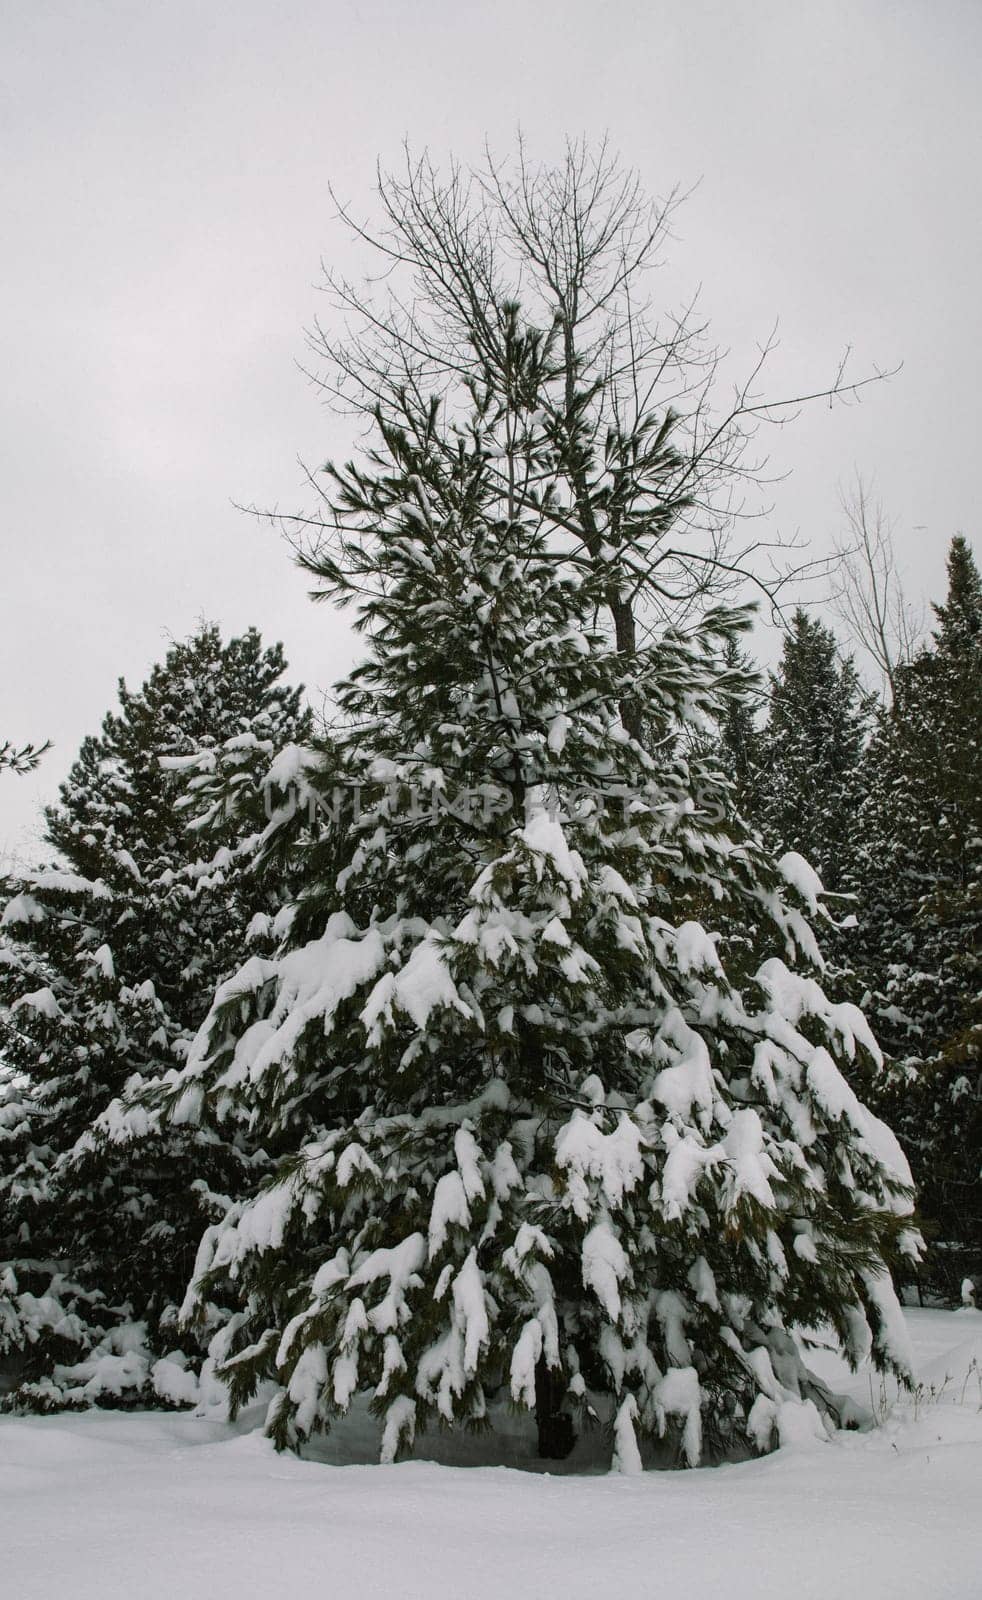 Conifer tree covered in snow on a cloud covered day in the Bruce Peninsula, Ontario by Granchinho